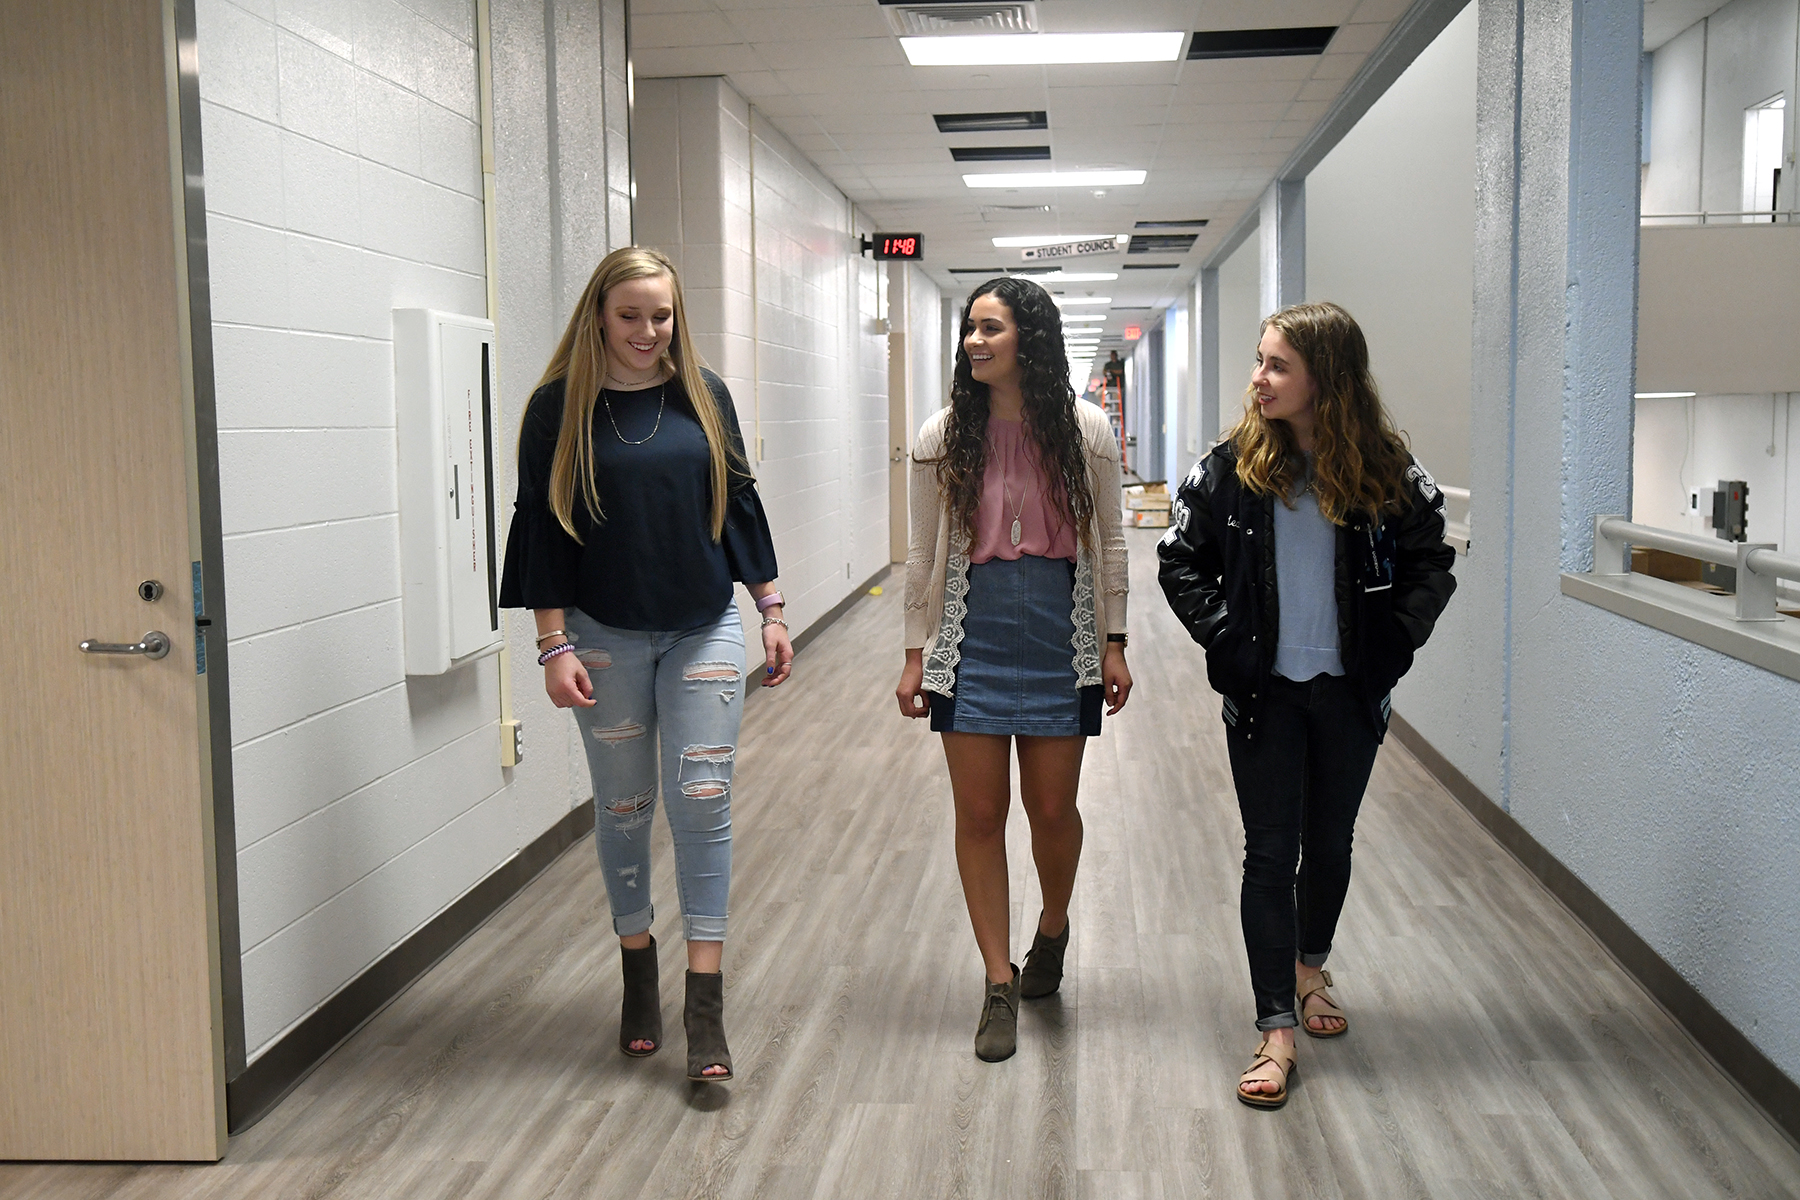 Kingwood High School students excited to return home campus - Houston Chronicle